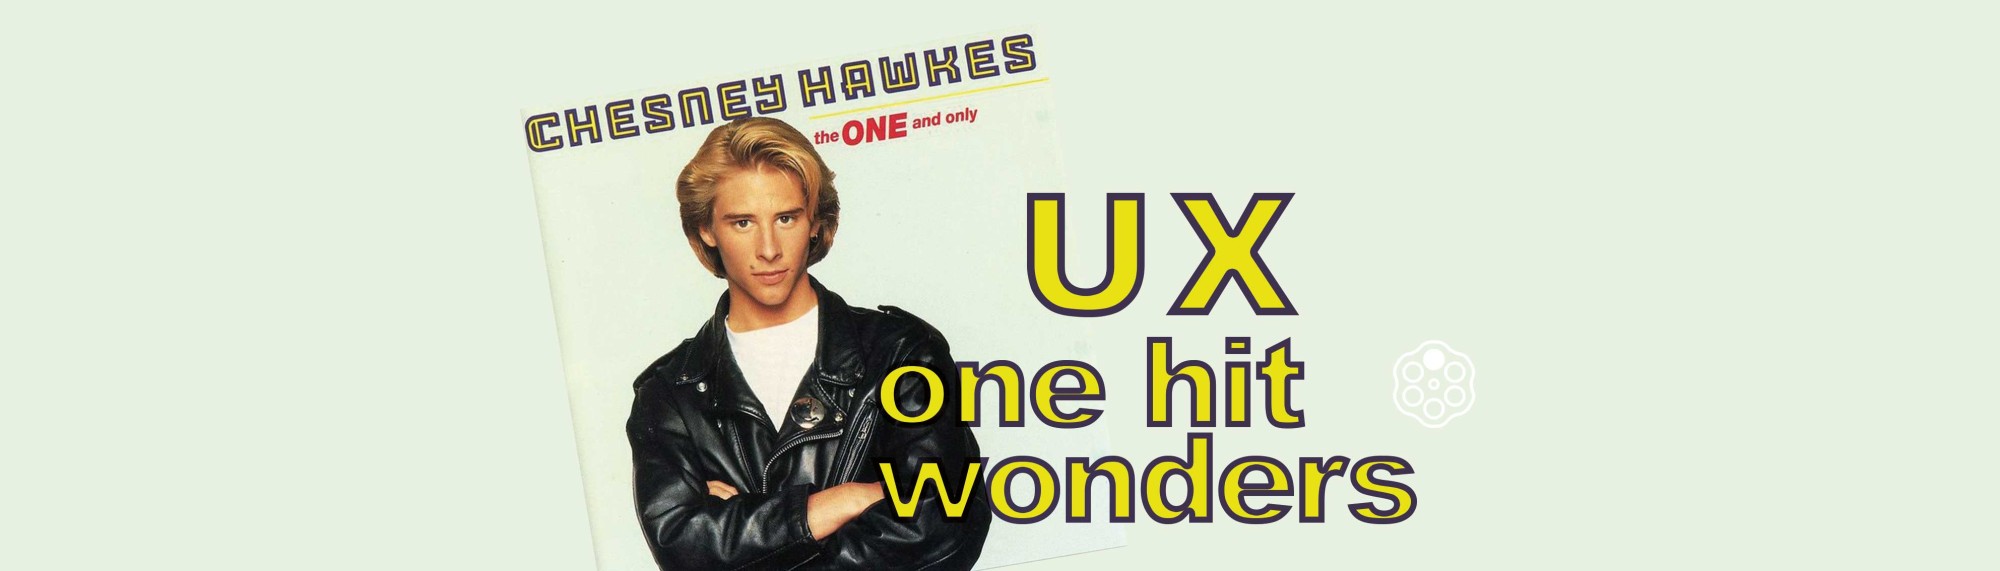 Are you a digital one hit wonder?